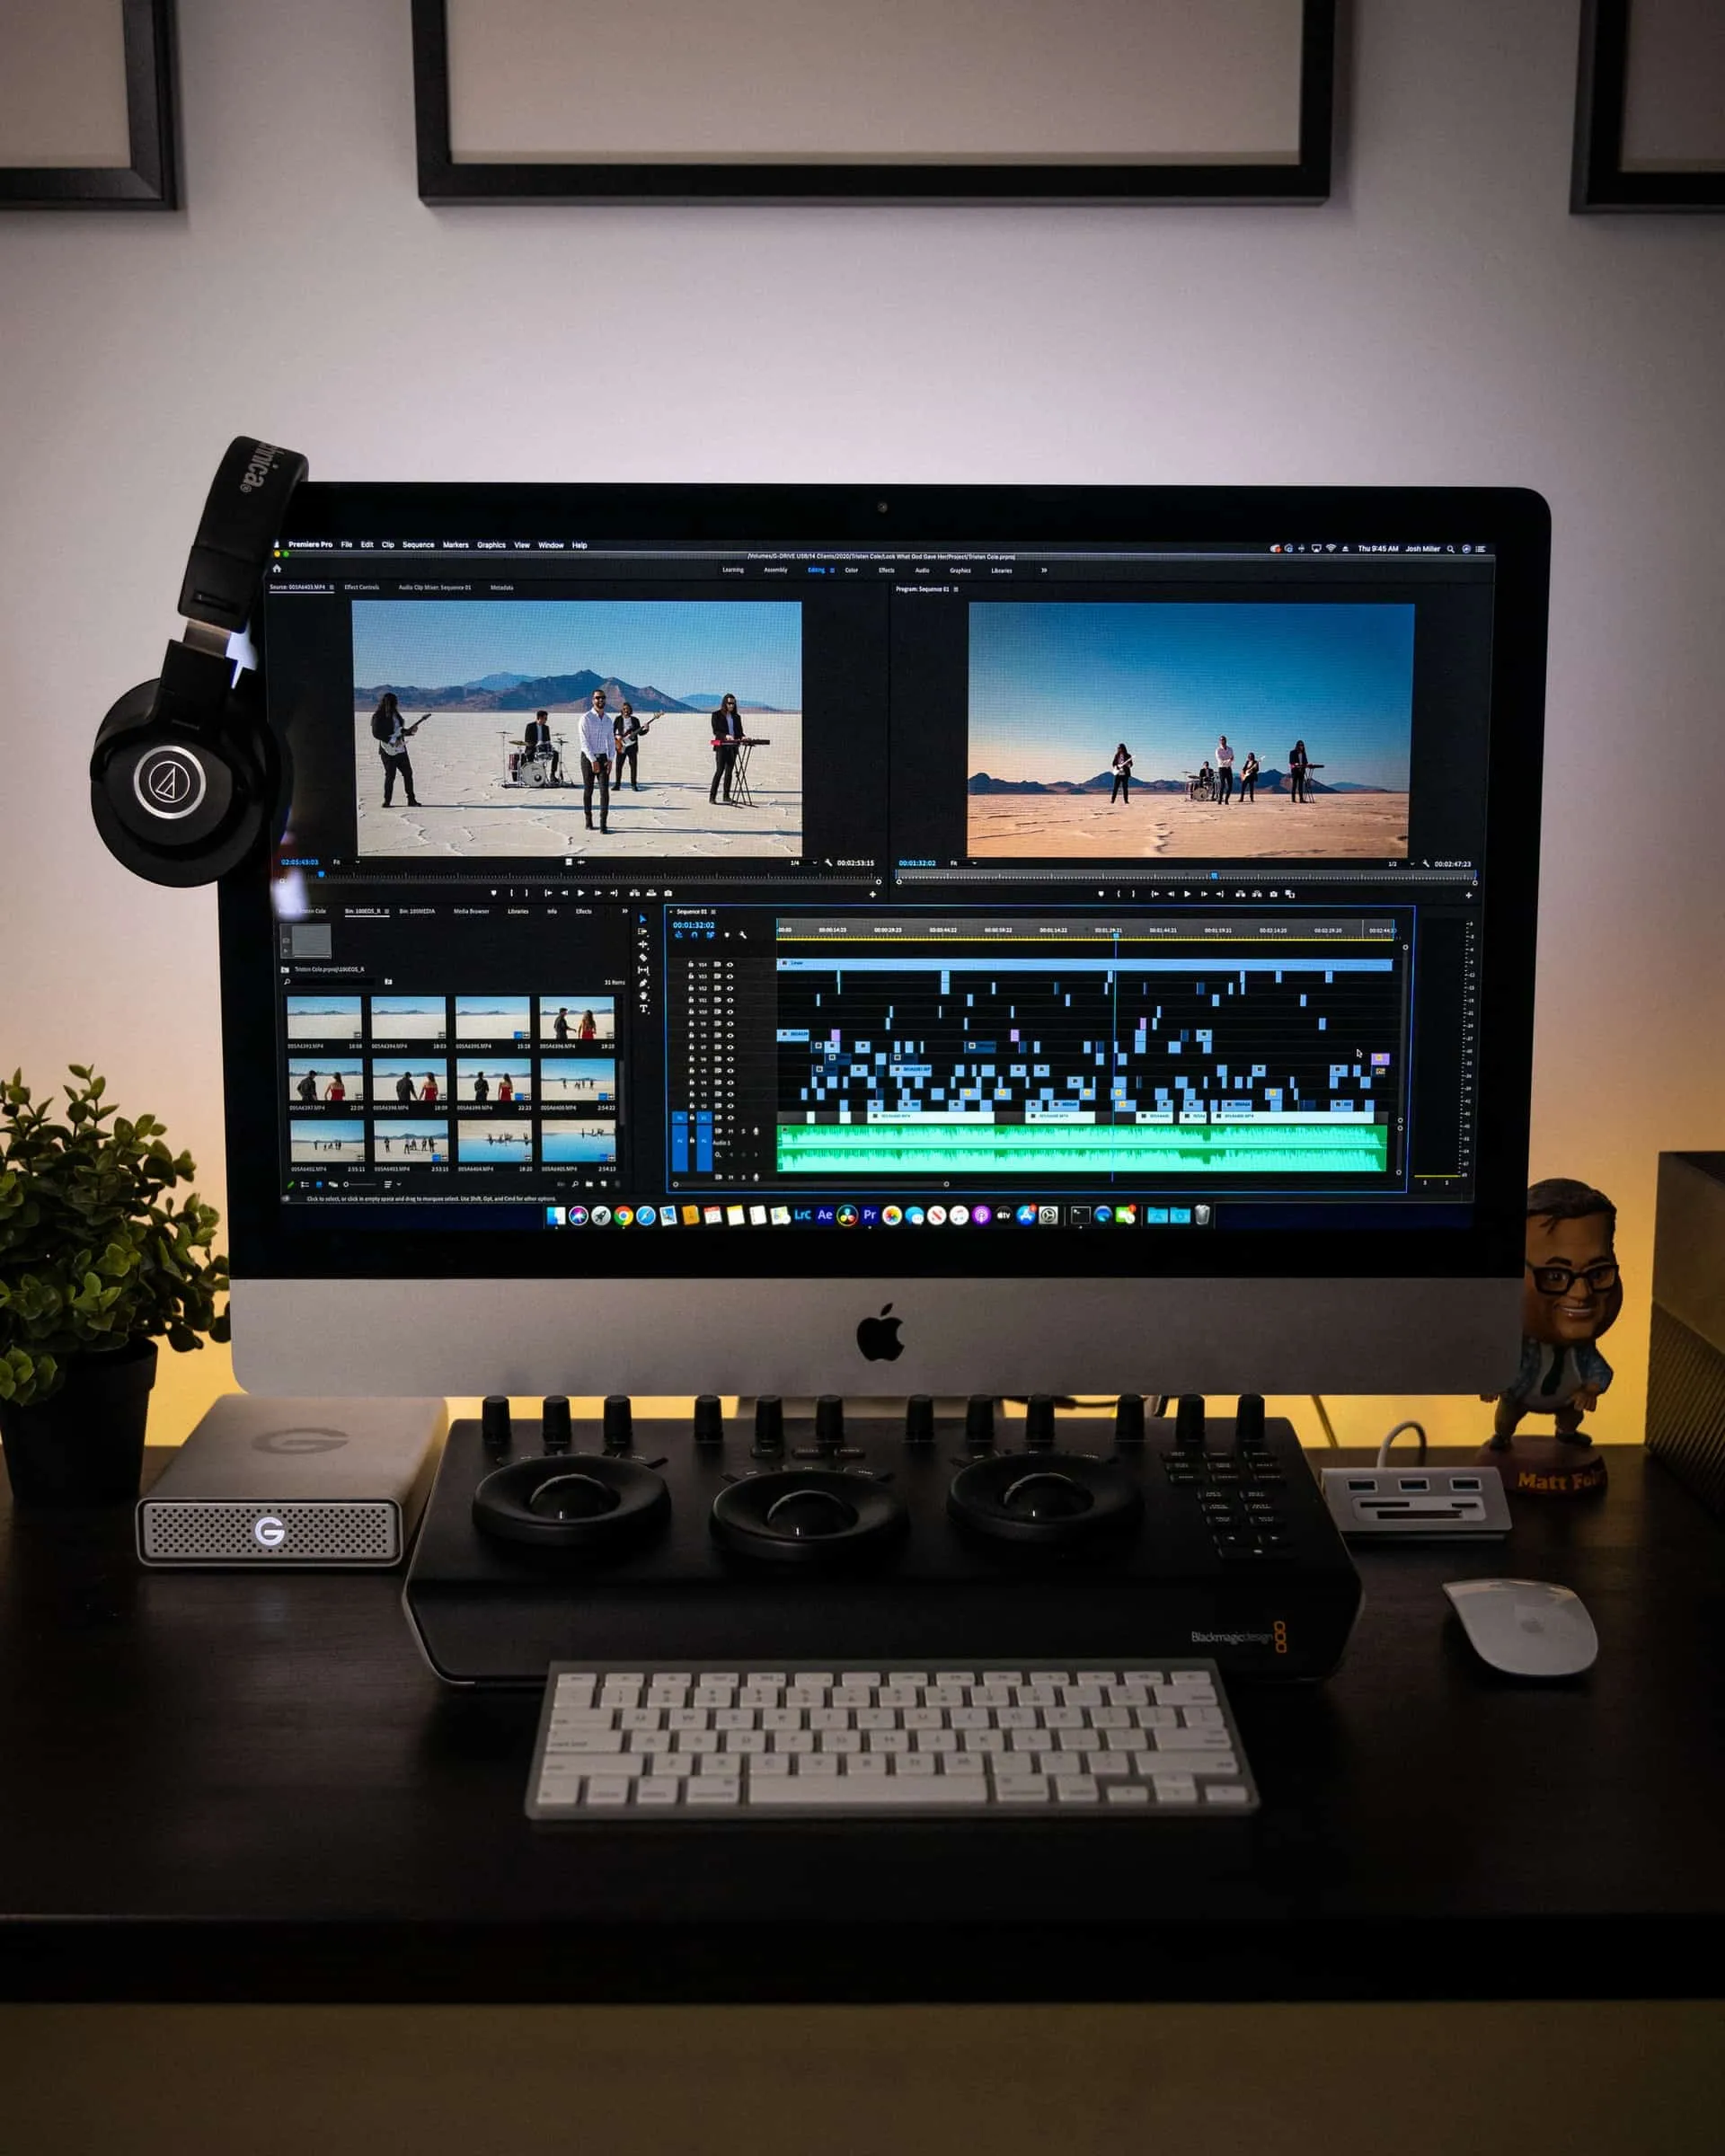 Solved: Can You Buy Adobe Premiere Pro Permanently?